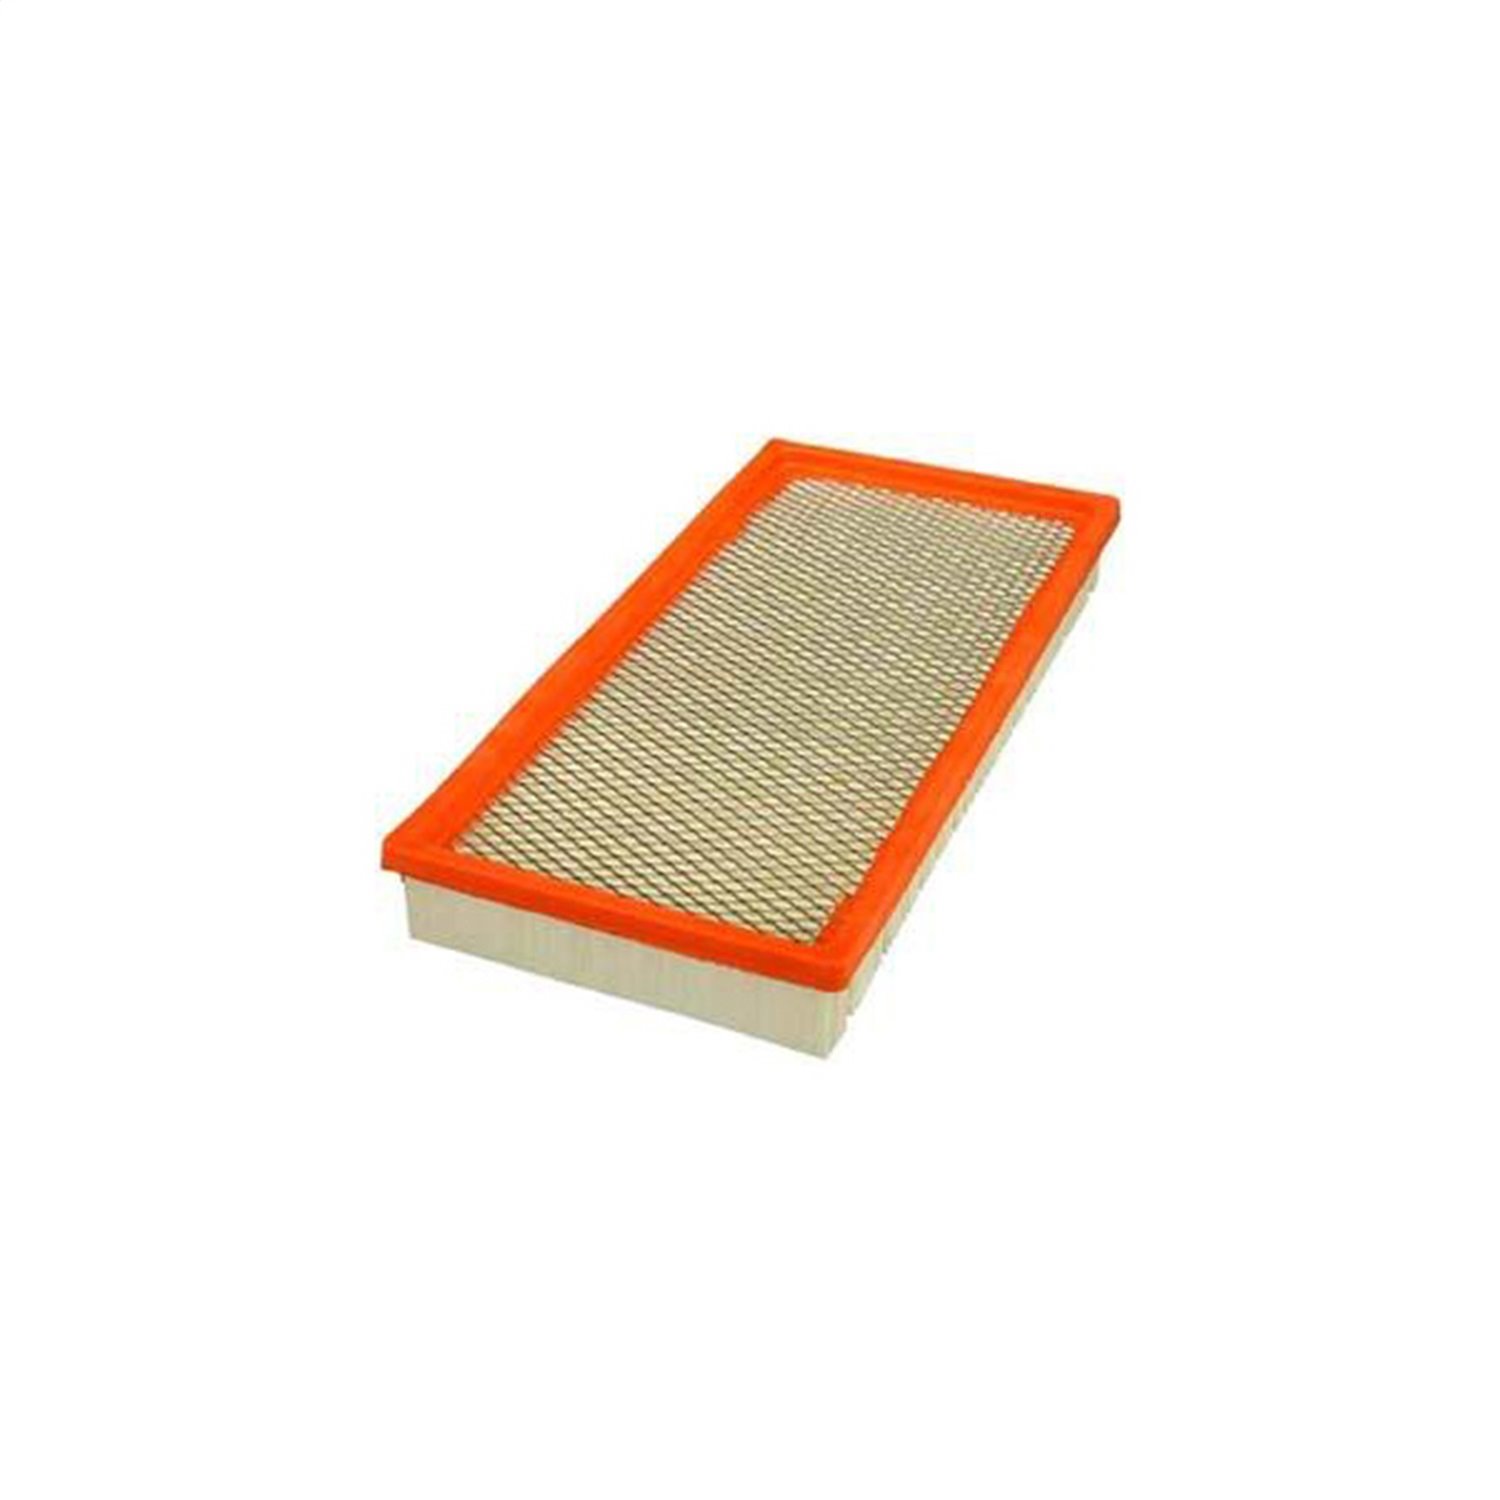 Replacement air filter from Omix-ADA, Fits 87-00 Jeep